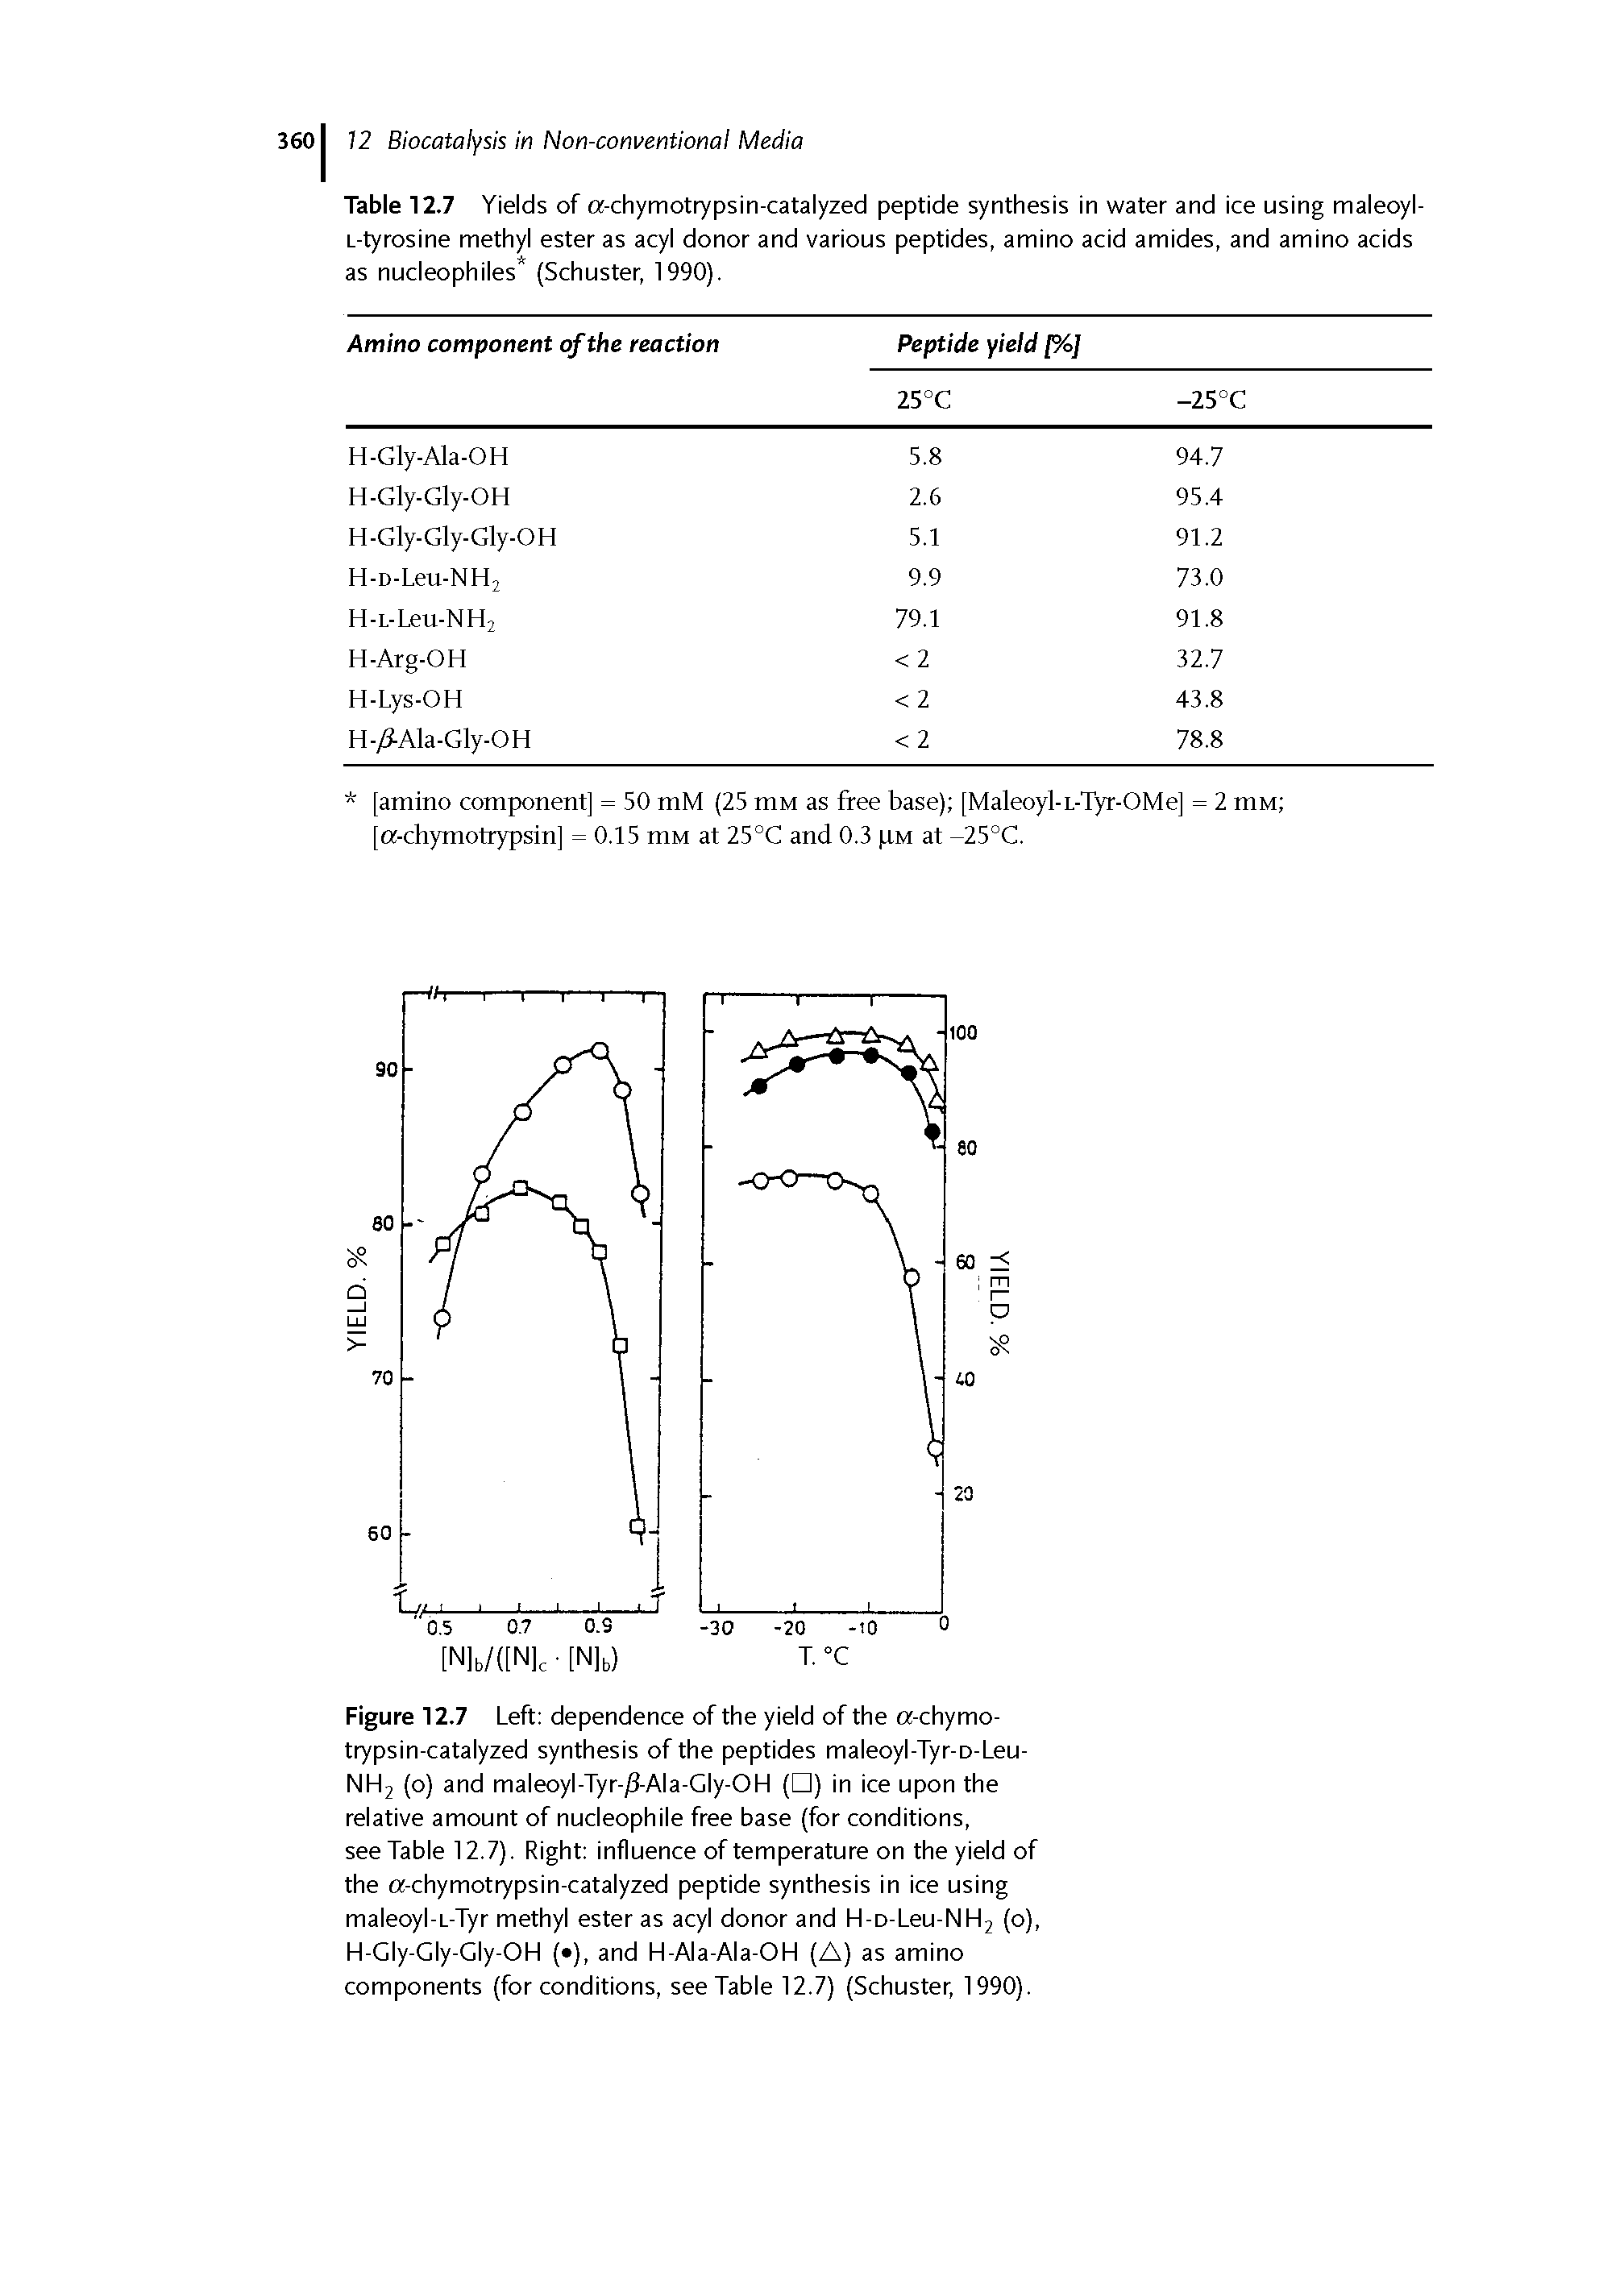 Table 12.7 Yields of a-chymotrypsin-catalyzed peptide synthesis in water and ice using maleoyl-L-tyrosine methyl ester as acyl donor and various peptides, amino acid amides, and amino acids as nucleophiles (Schuster, 1990).